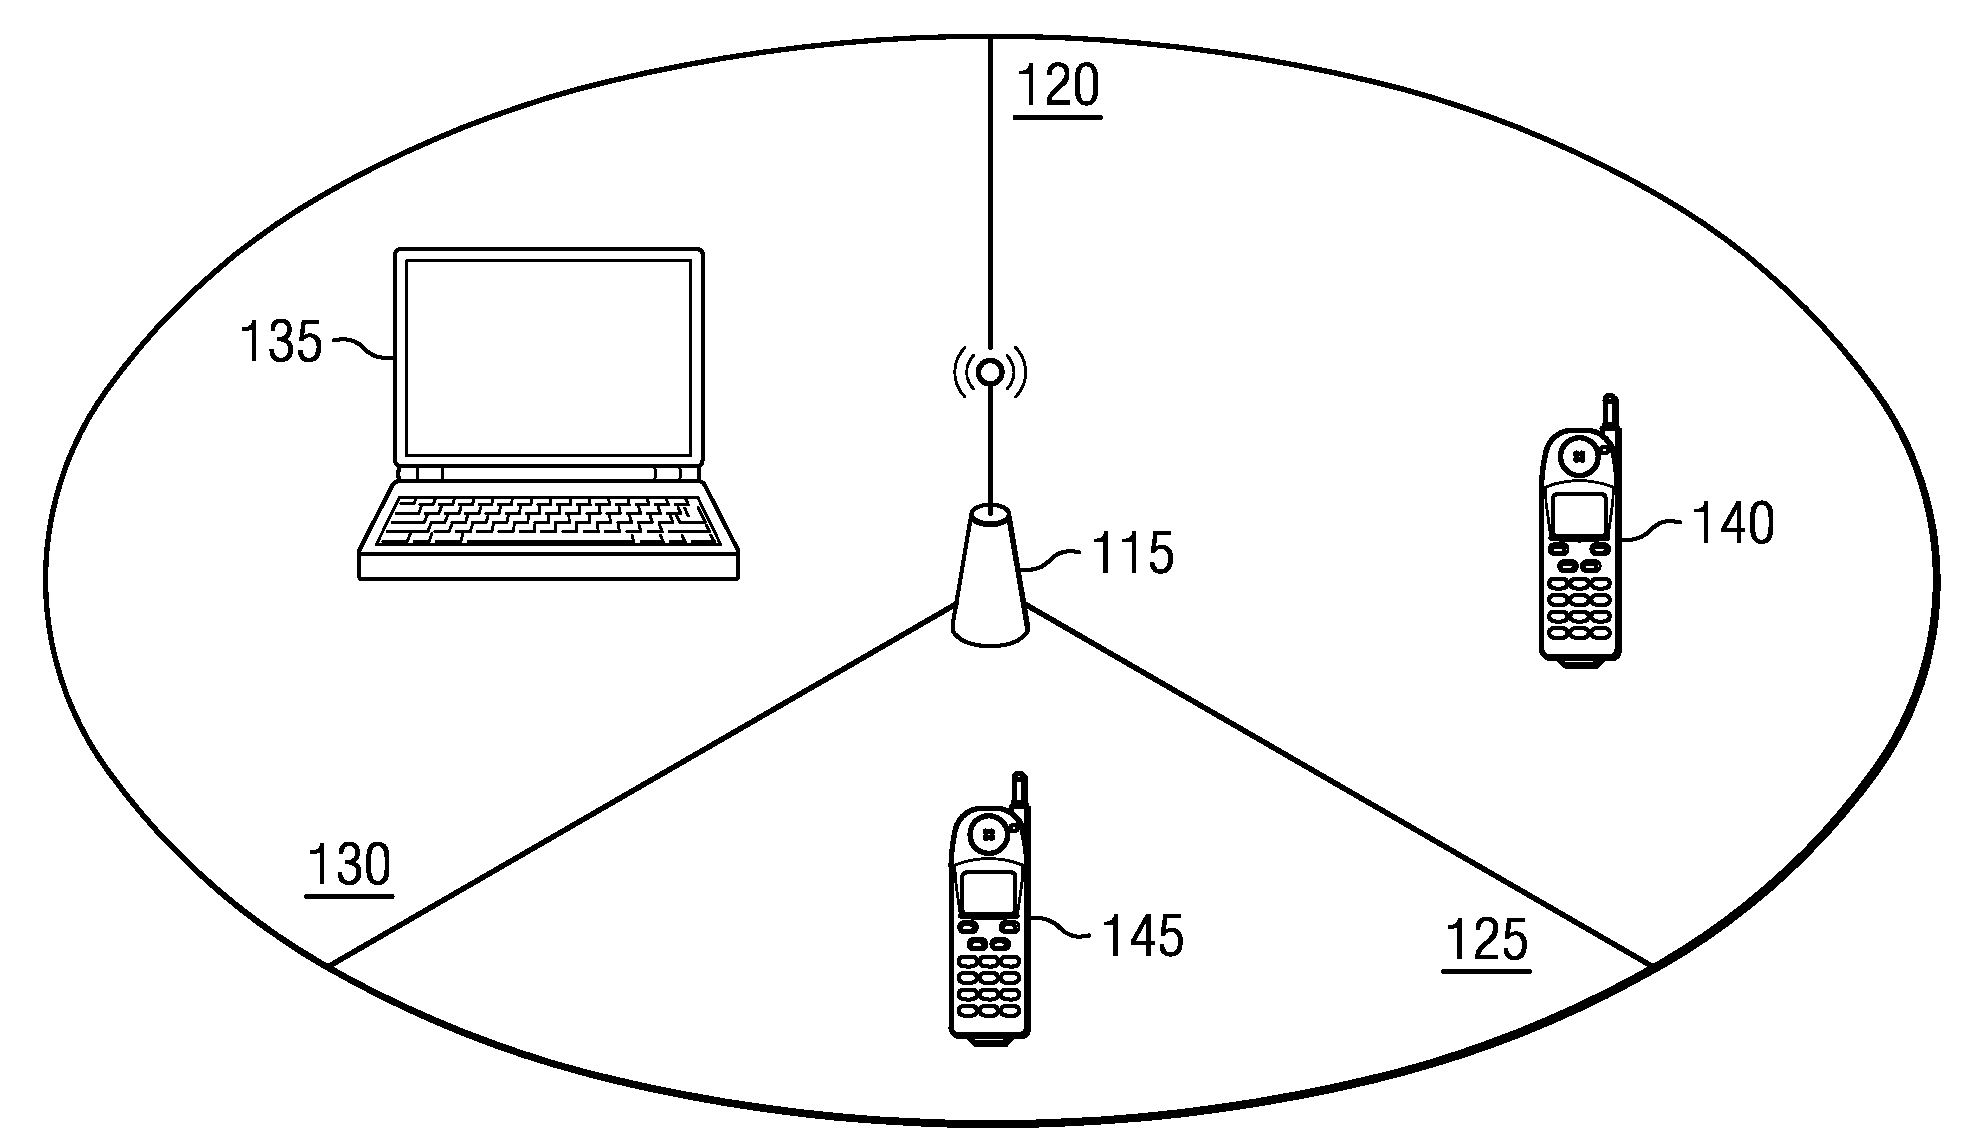 Apparatus and method to allocate communication resources for an aperiodic data packet in a communication system